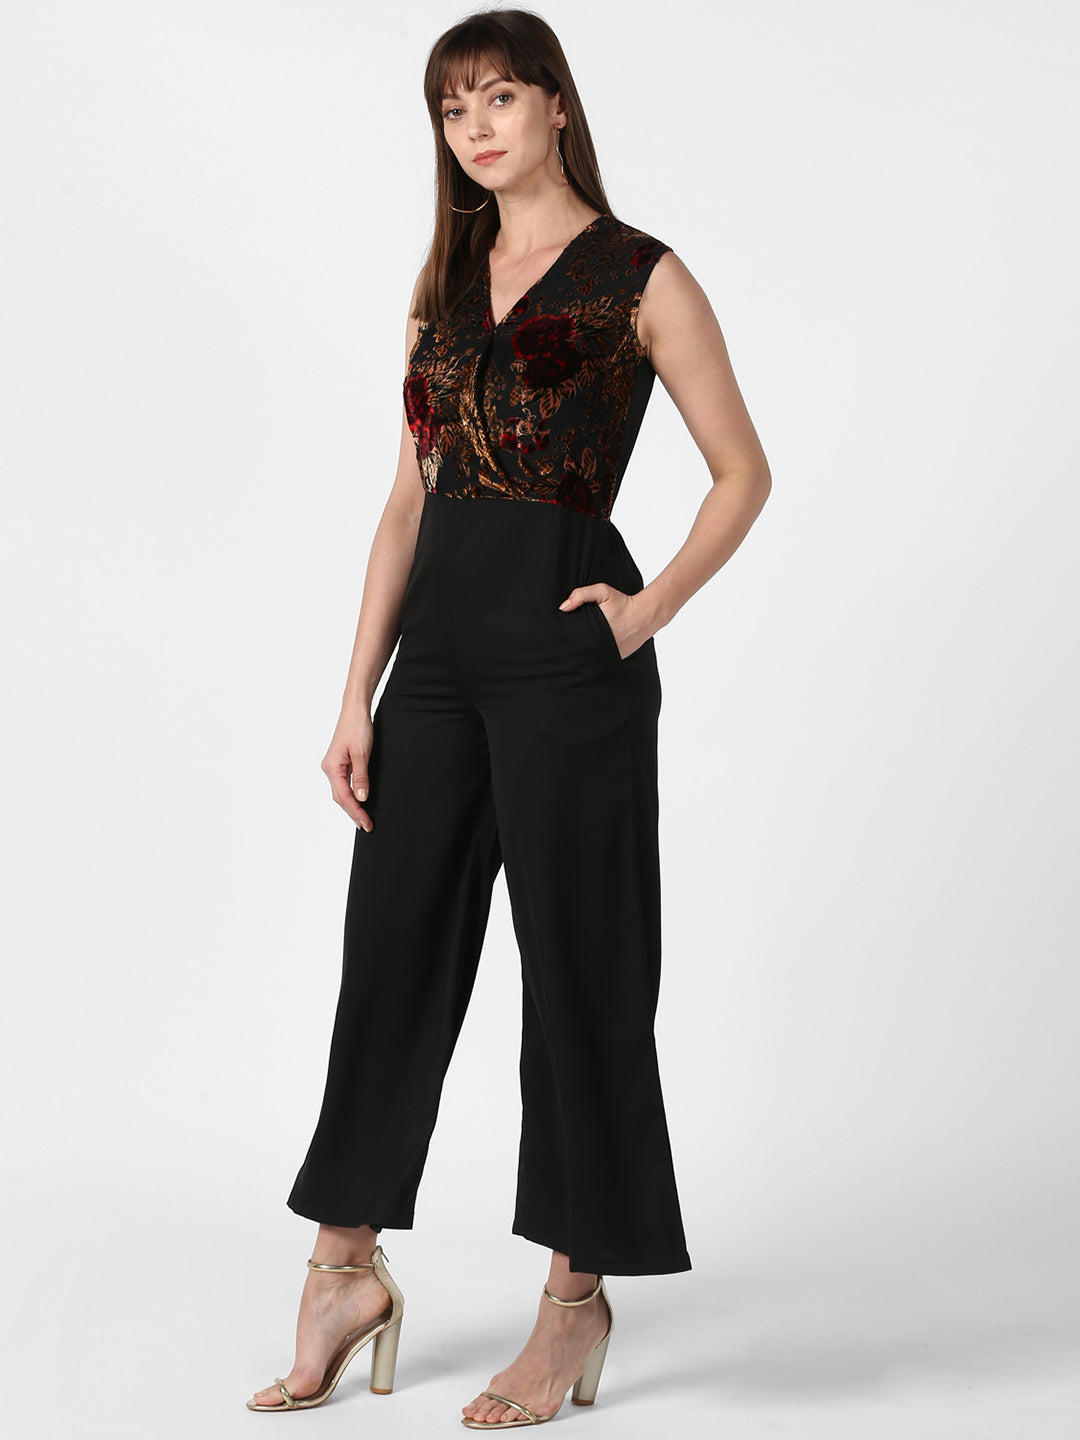 Women's Black and Red Flocking Print Jumpsuit